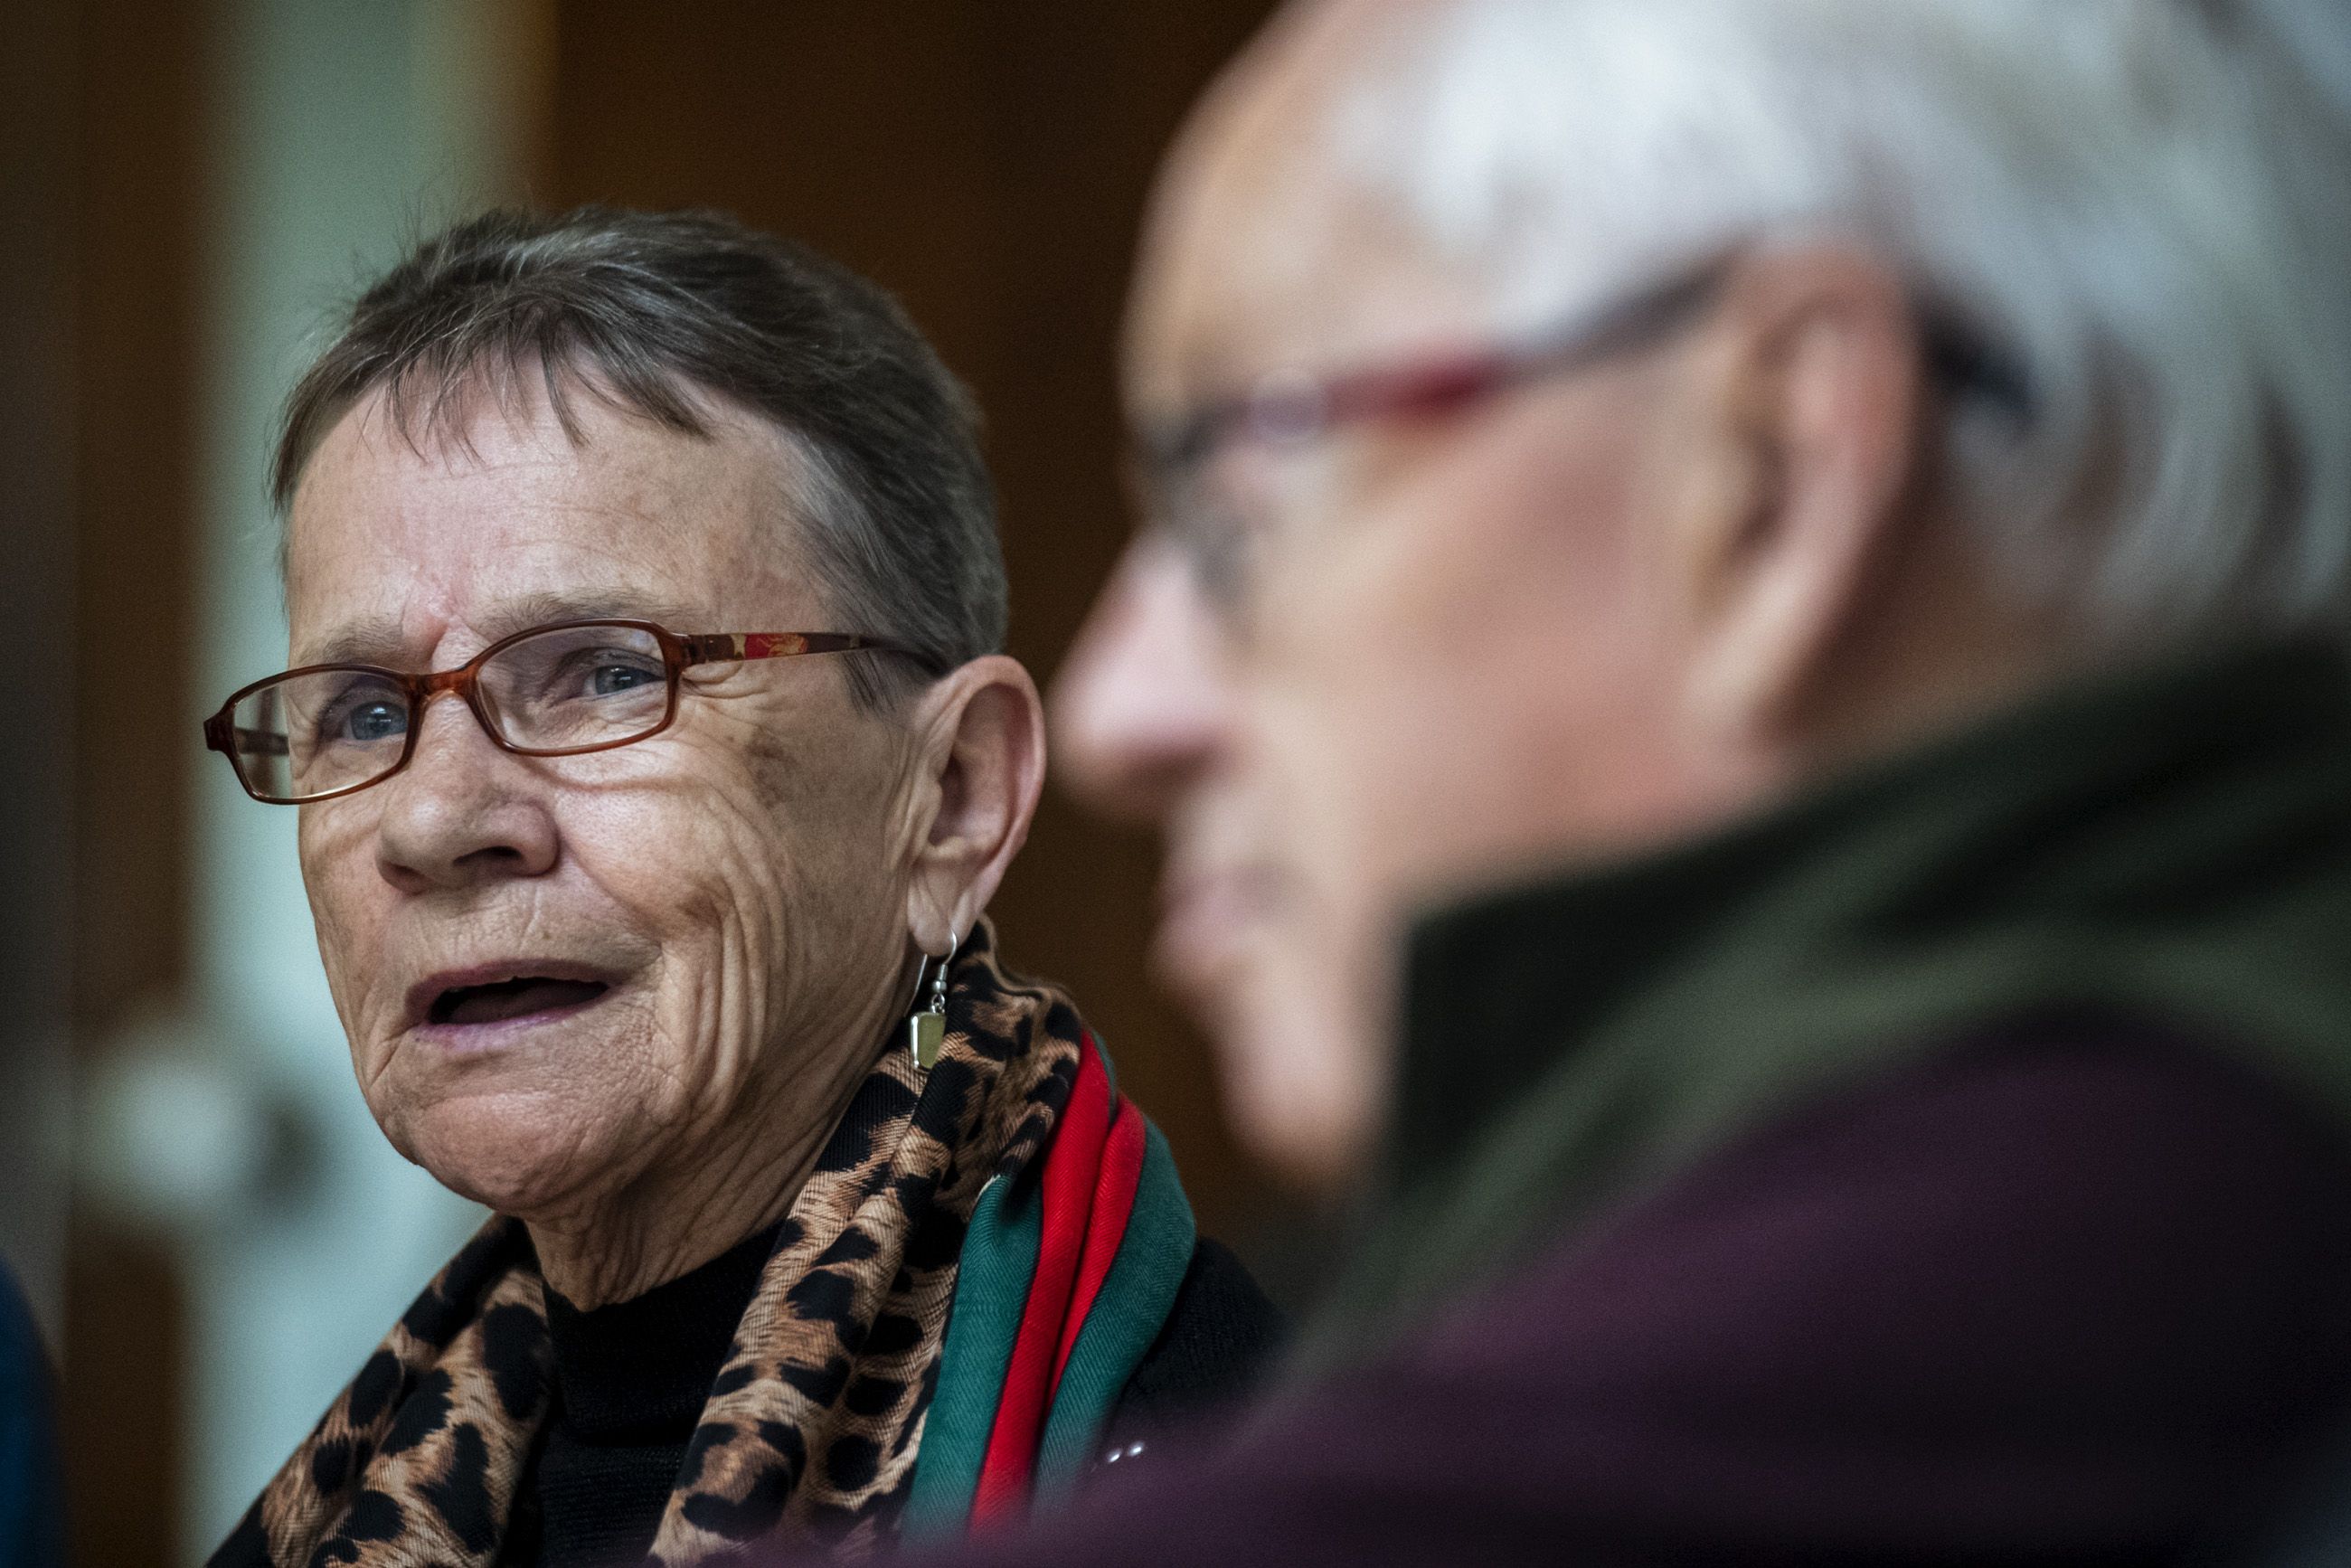 Jean Forrester, of Possilpark a neighborhood of Glasgow, speaks during the monthly Poverty Truth Community meeting as John Harvey, of Govan, a neighborhood in Glasgow, listens. Image by Michael Santiago. United Kingdom, 2019.